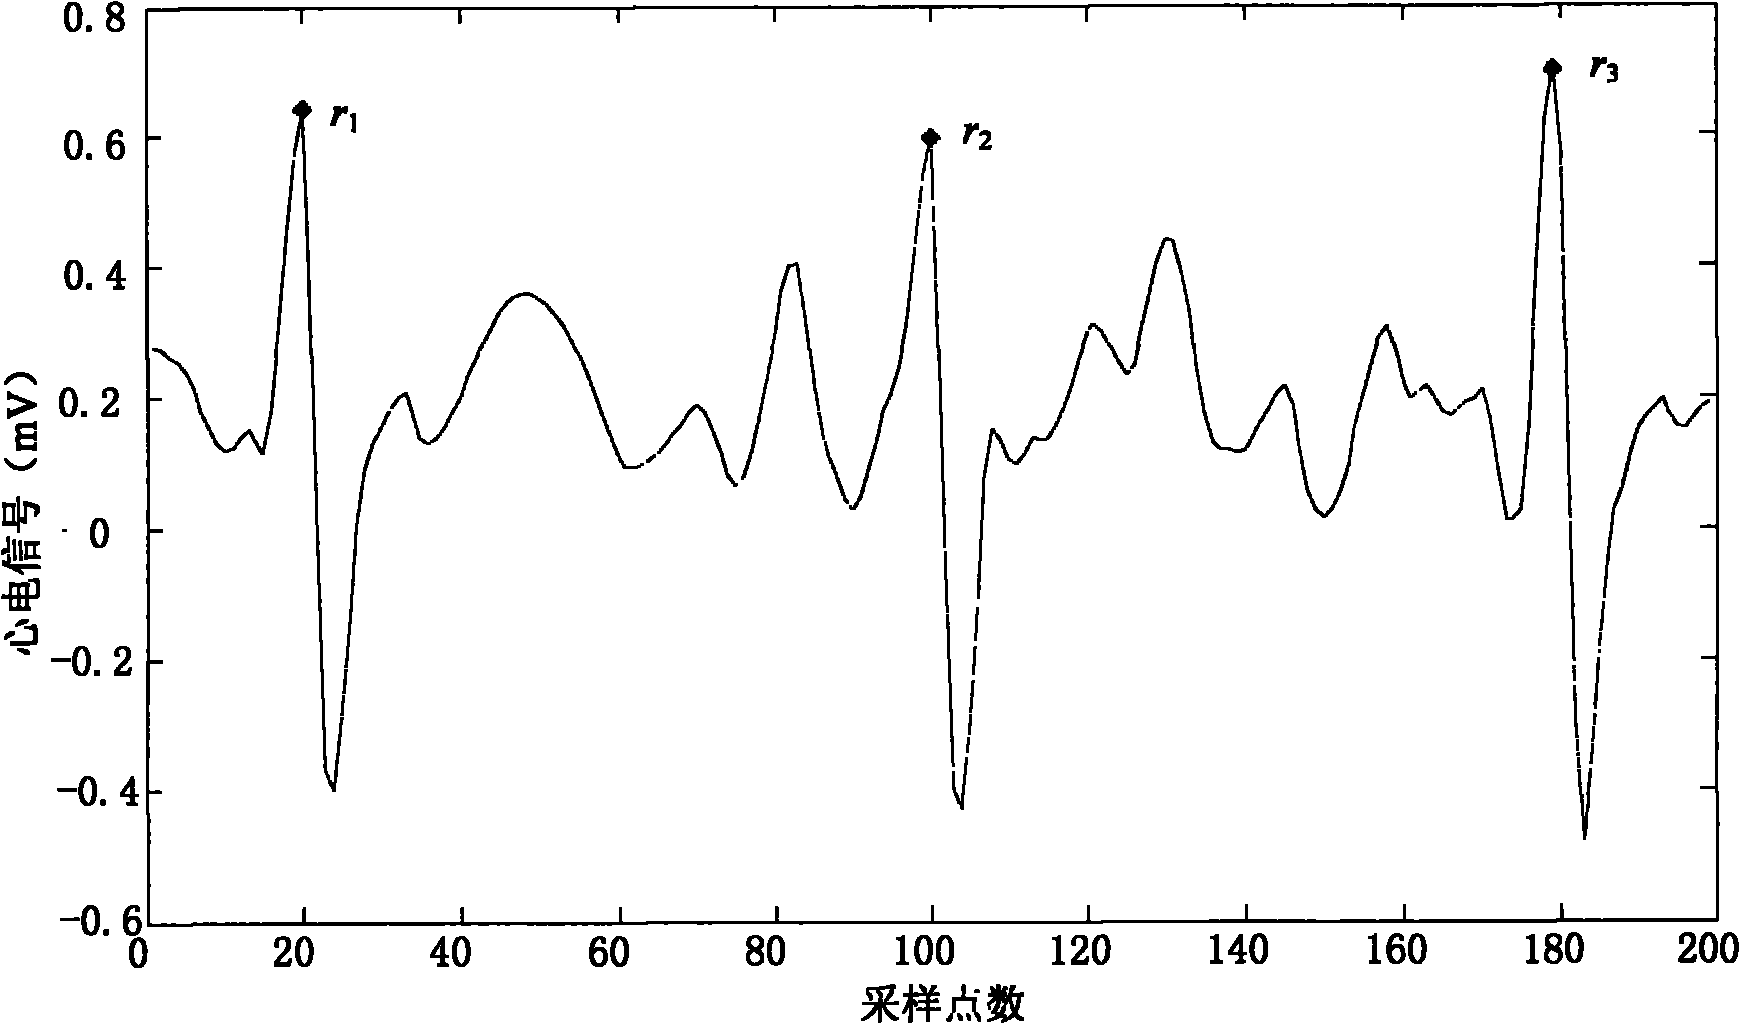 Method for detecting R wave crest of electrocardiosignal